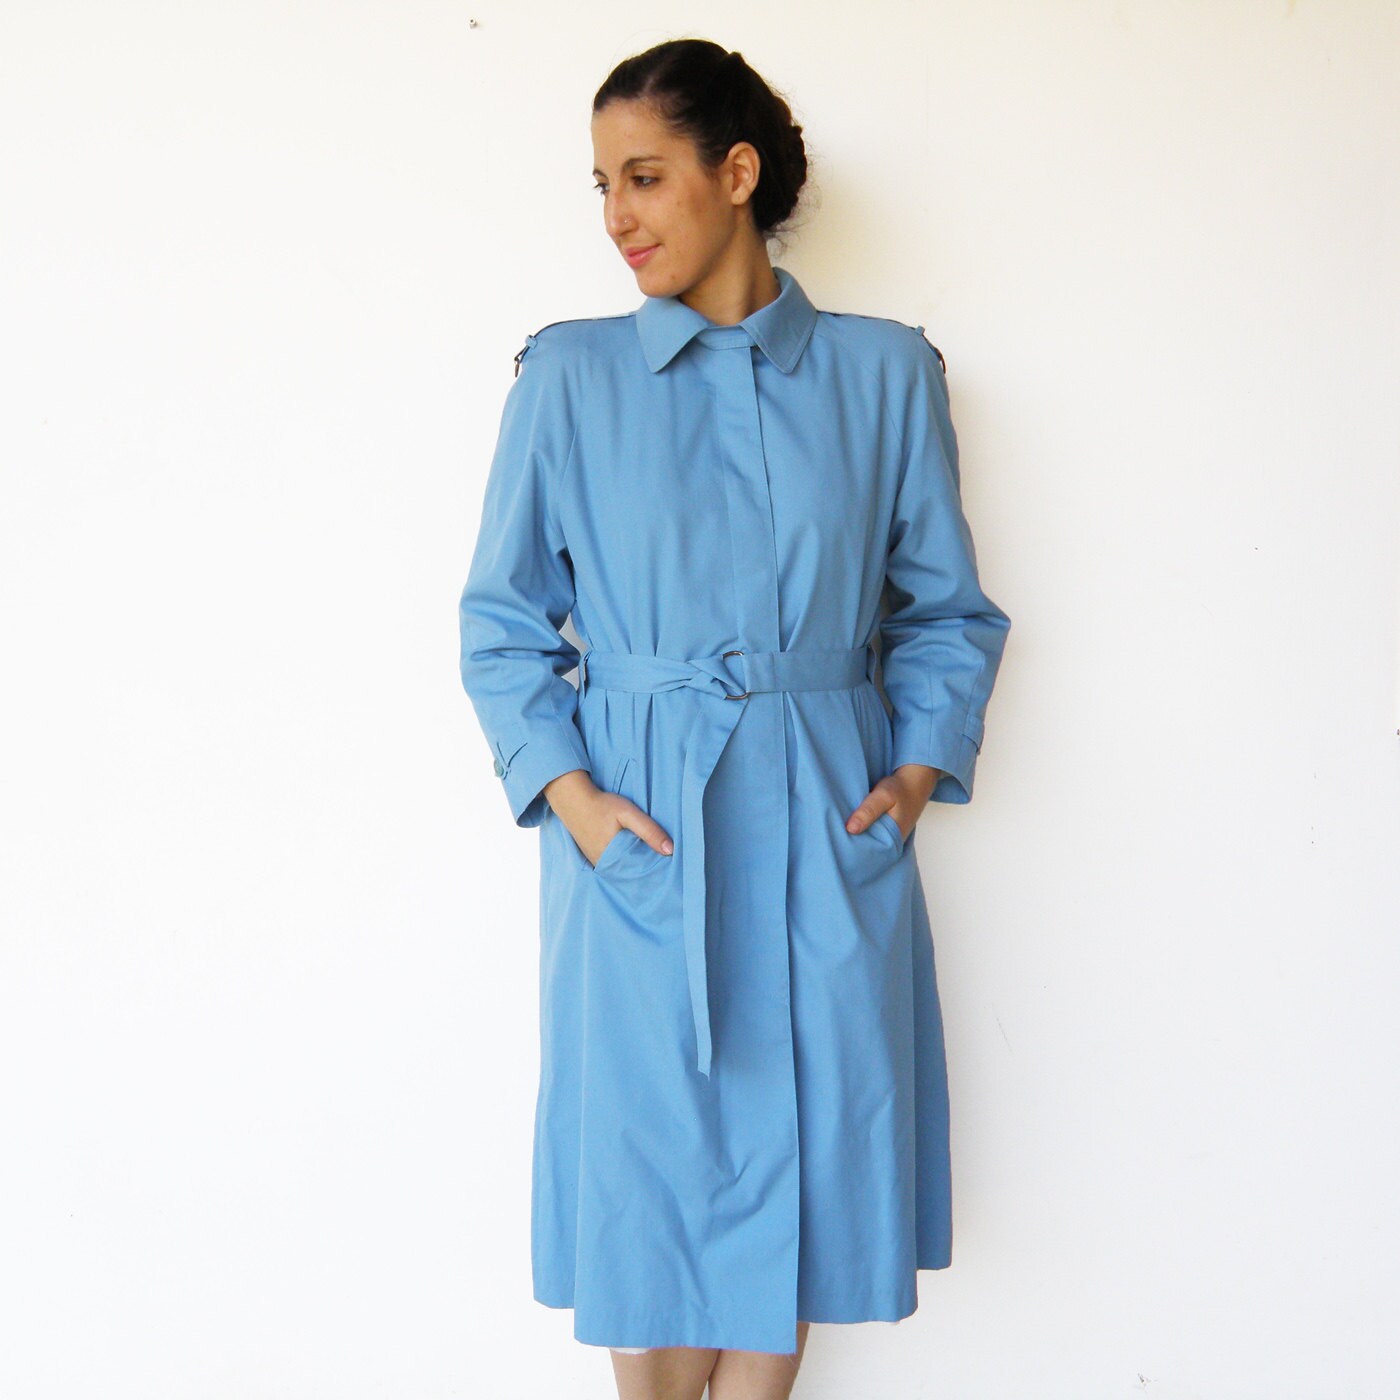 Vintage Classic Trench Coat / Baby Blue Trenchcoat / Size M L | Etsy